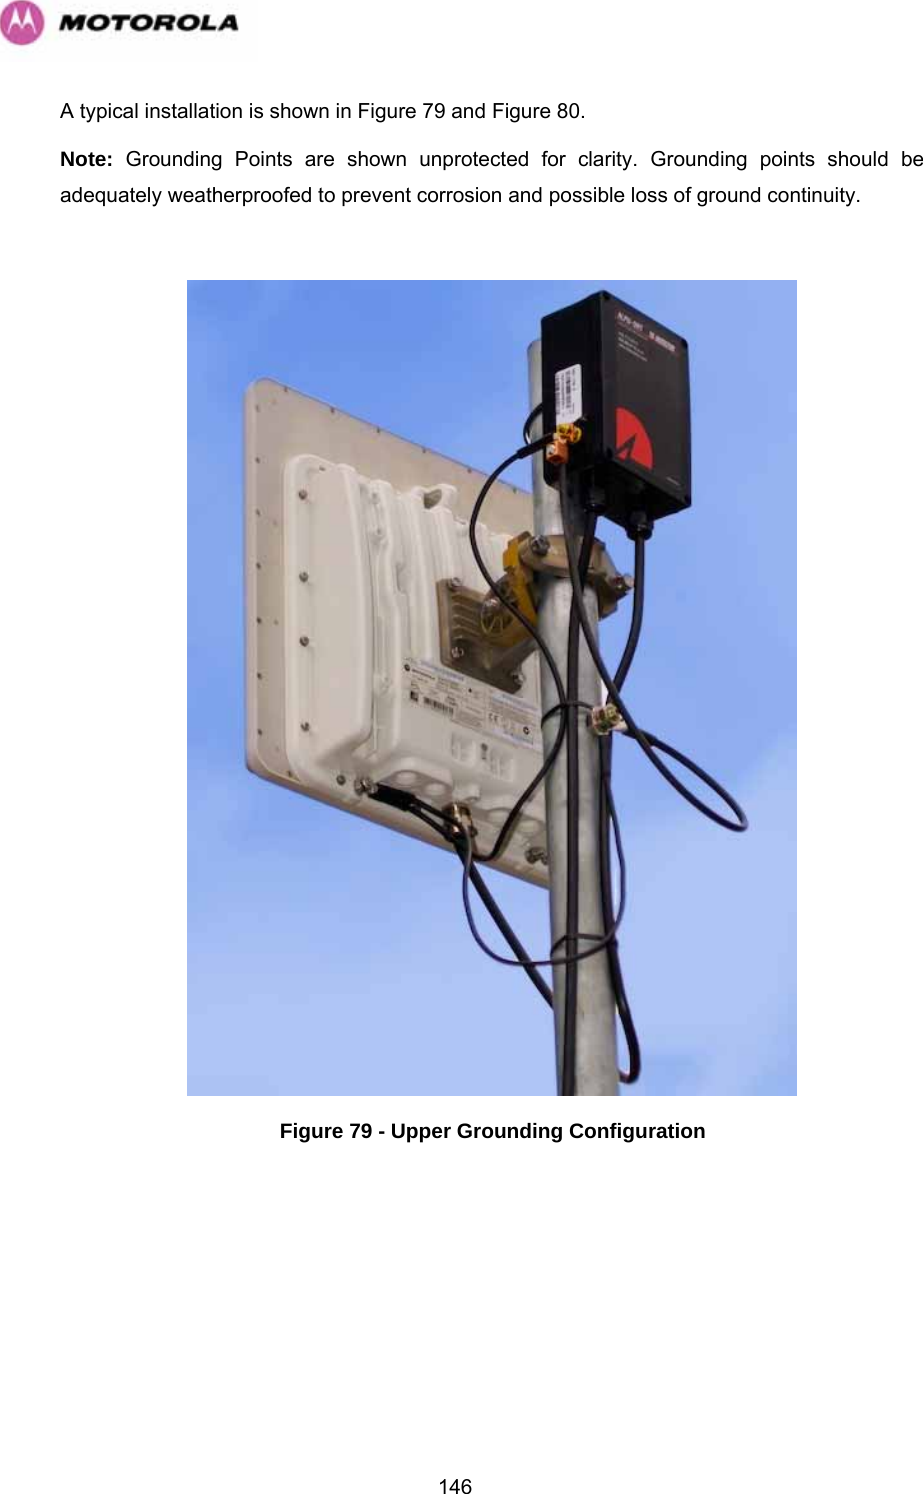   146A typical installation is shown in Figure 79 and Figure 80. Note: Grounding Points are shown unprotected for clarity. Grounding points should be adequately weatherproofed to prevent corrosion and possible loss of ground continuity.   Figure 79 - Upper Grounding Configuration 